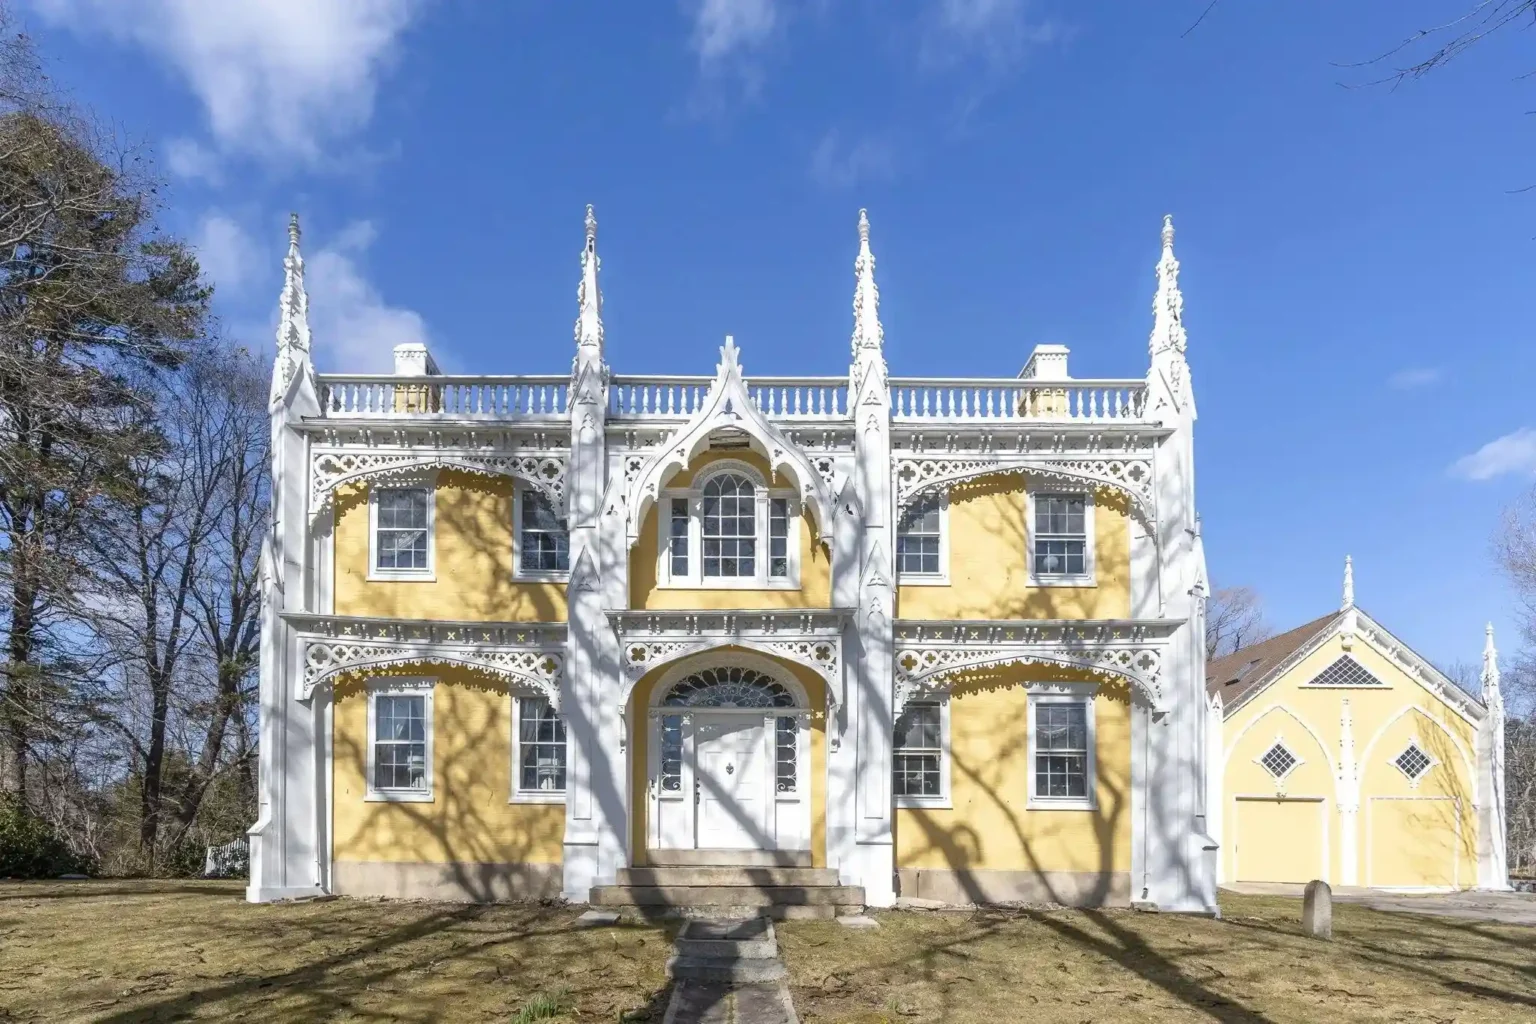 The iconic 'wedding cake' house in Kennebunk, Maine, known for its intricate gothic trim, hits the market for £2 million. With stunning river views and historical charm, it offers over 6,000 square feet of living space, including five bedrooms, vintage interiors, and potential for renovation.